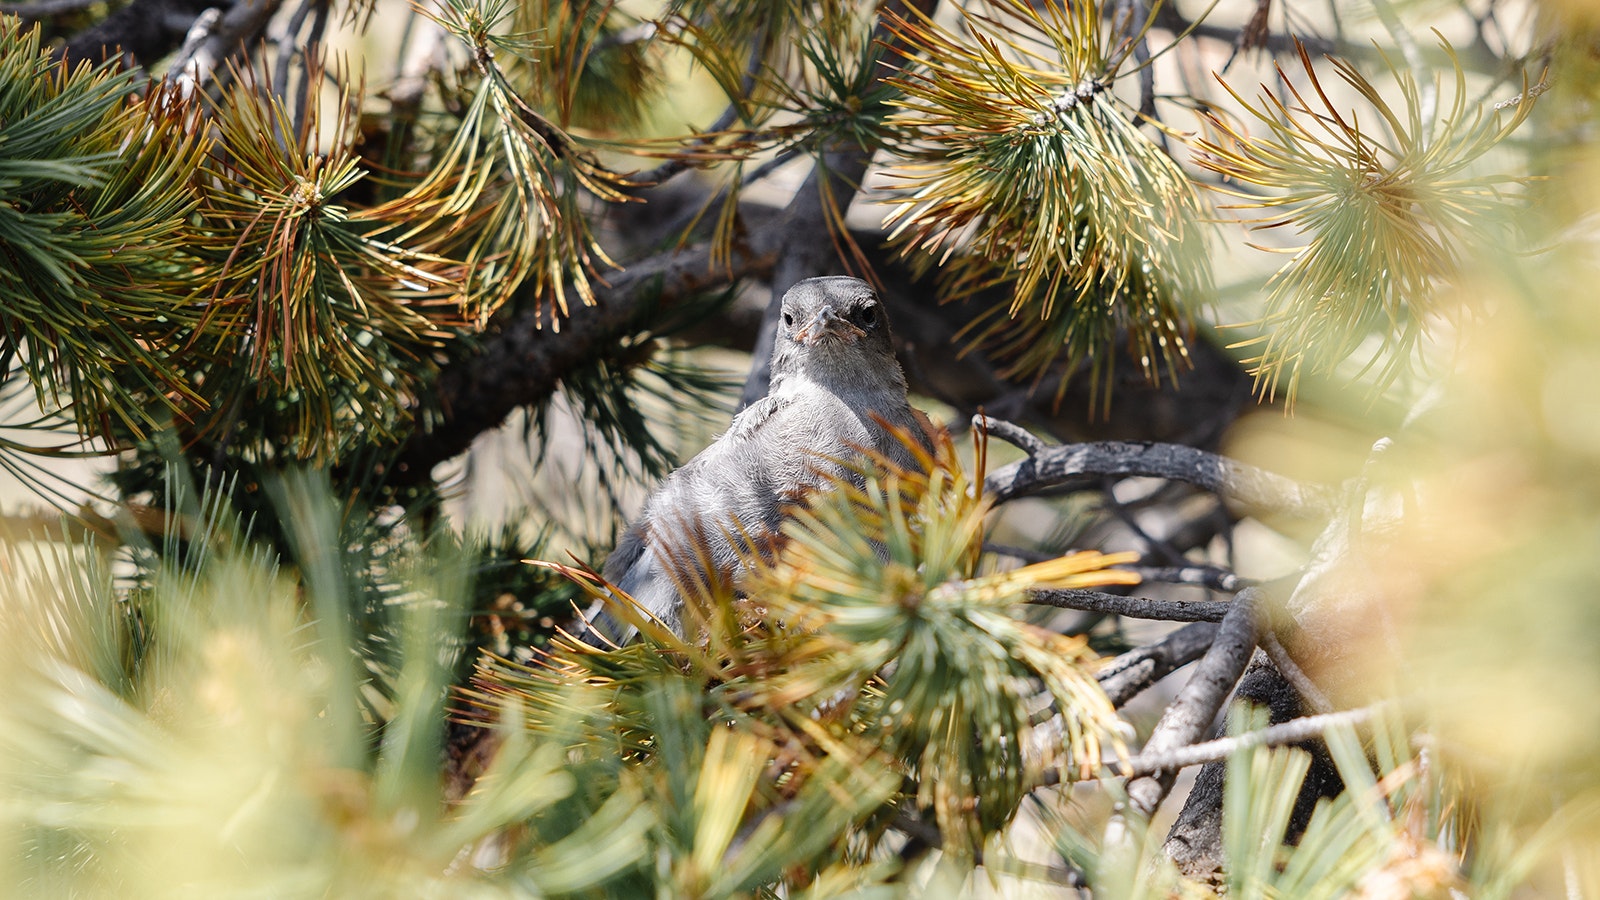 Juvenile pinyon Jays can be identified by their lighter, dusky blue color, shorter beaks, and characteristic pink gape in the corners of their mouth.